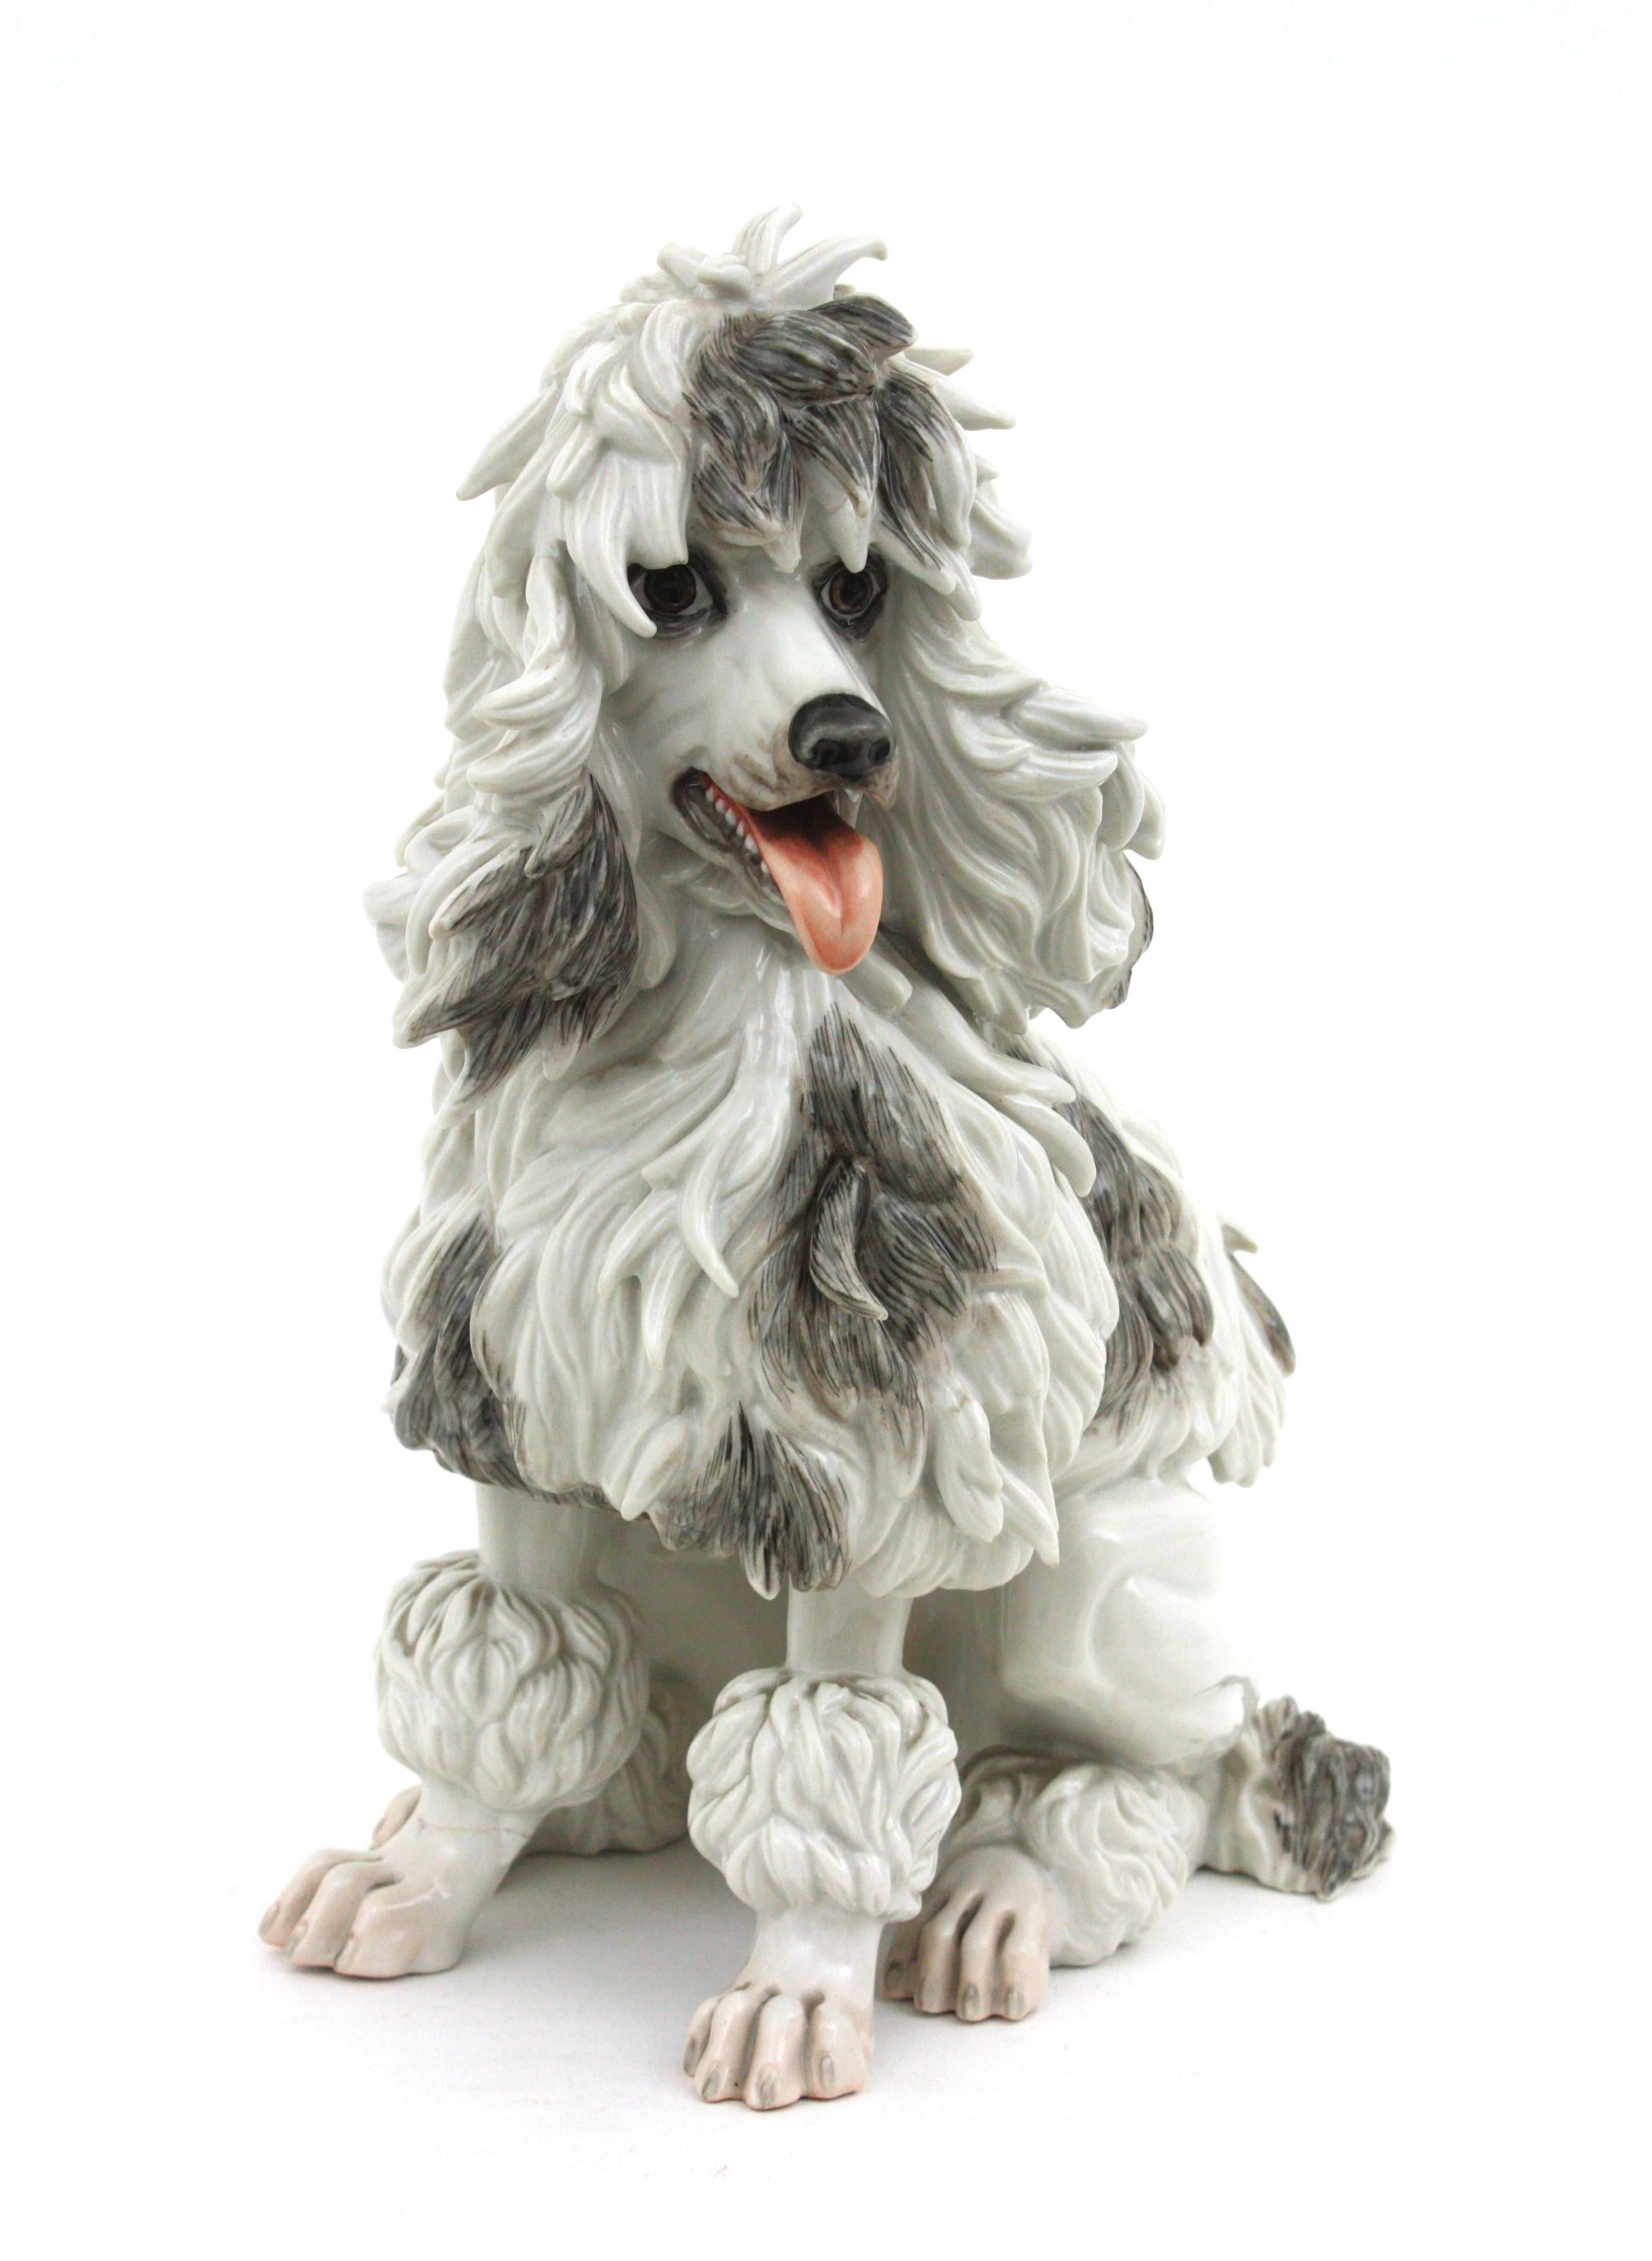 Eye-catching Porcelain Poodle Dog Sculpture. Manufactured by Algora, Spain, 1950s.
Very realistic finely handcrafted long hair poodle dog sculpture
Glazed Porcelain in white with gray brown accents.
Manufacturer's mark underneath
Stamp: ALGORA made